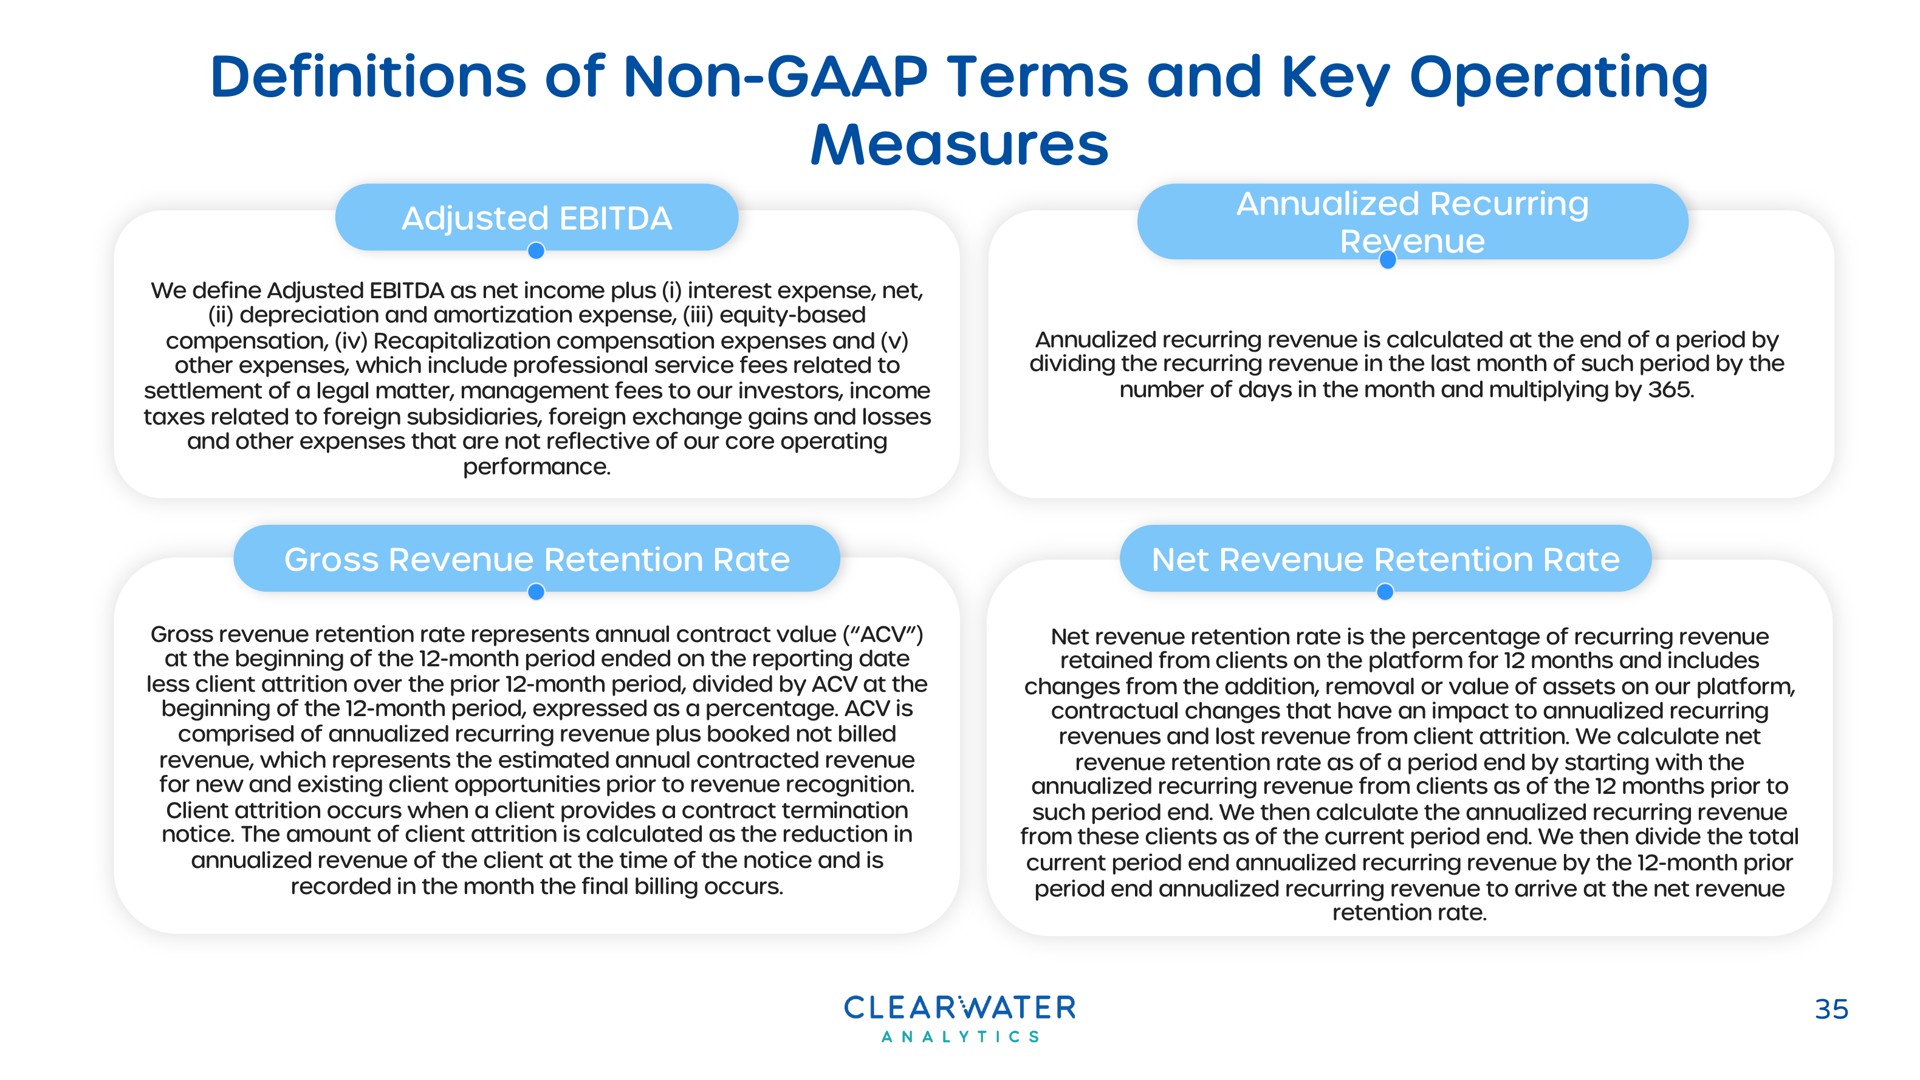 definitions of non terms and key operating measures | Clearwater Analytics